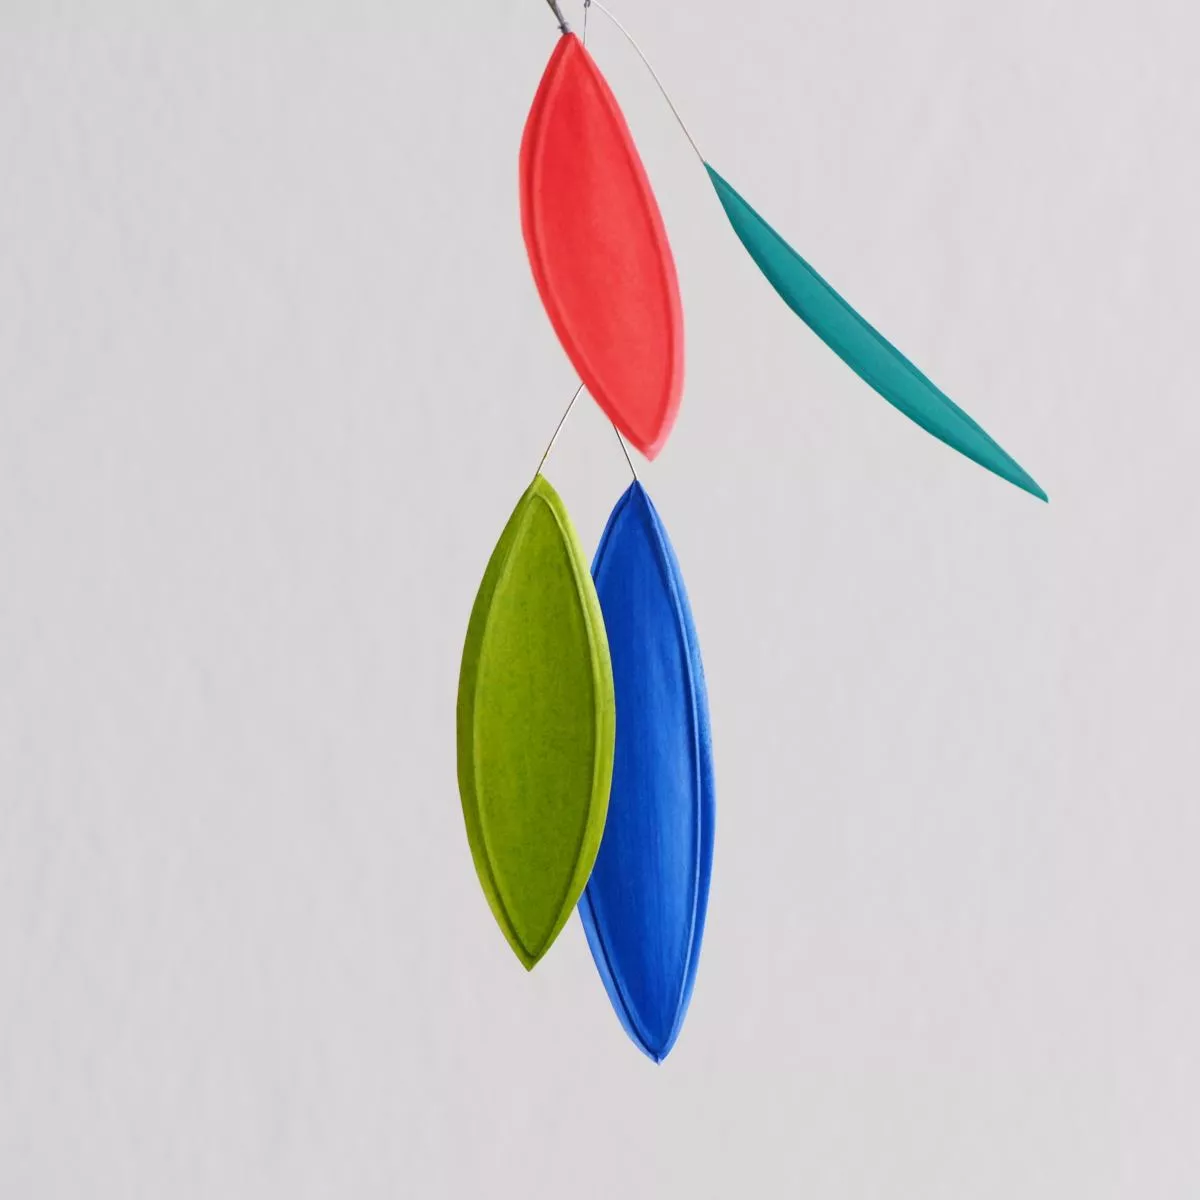 Leaf-Shaped Handpainted Mobile "Aki" in Bright Colors (60 x 60 cm)